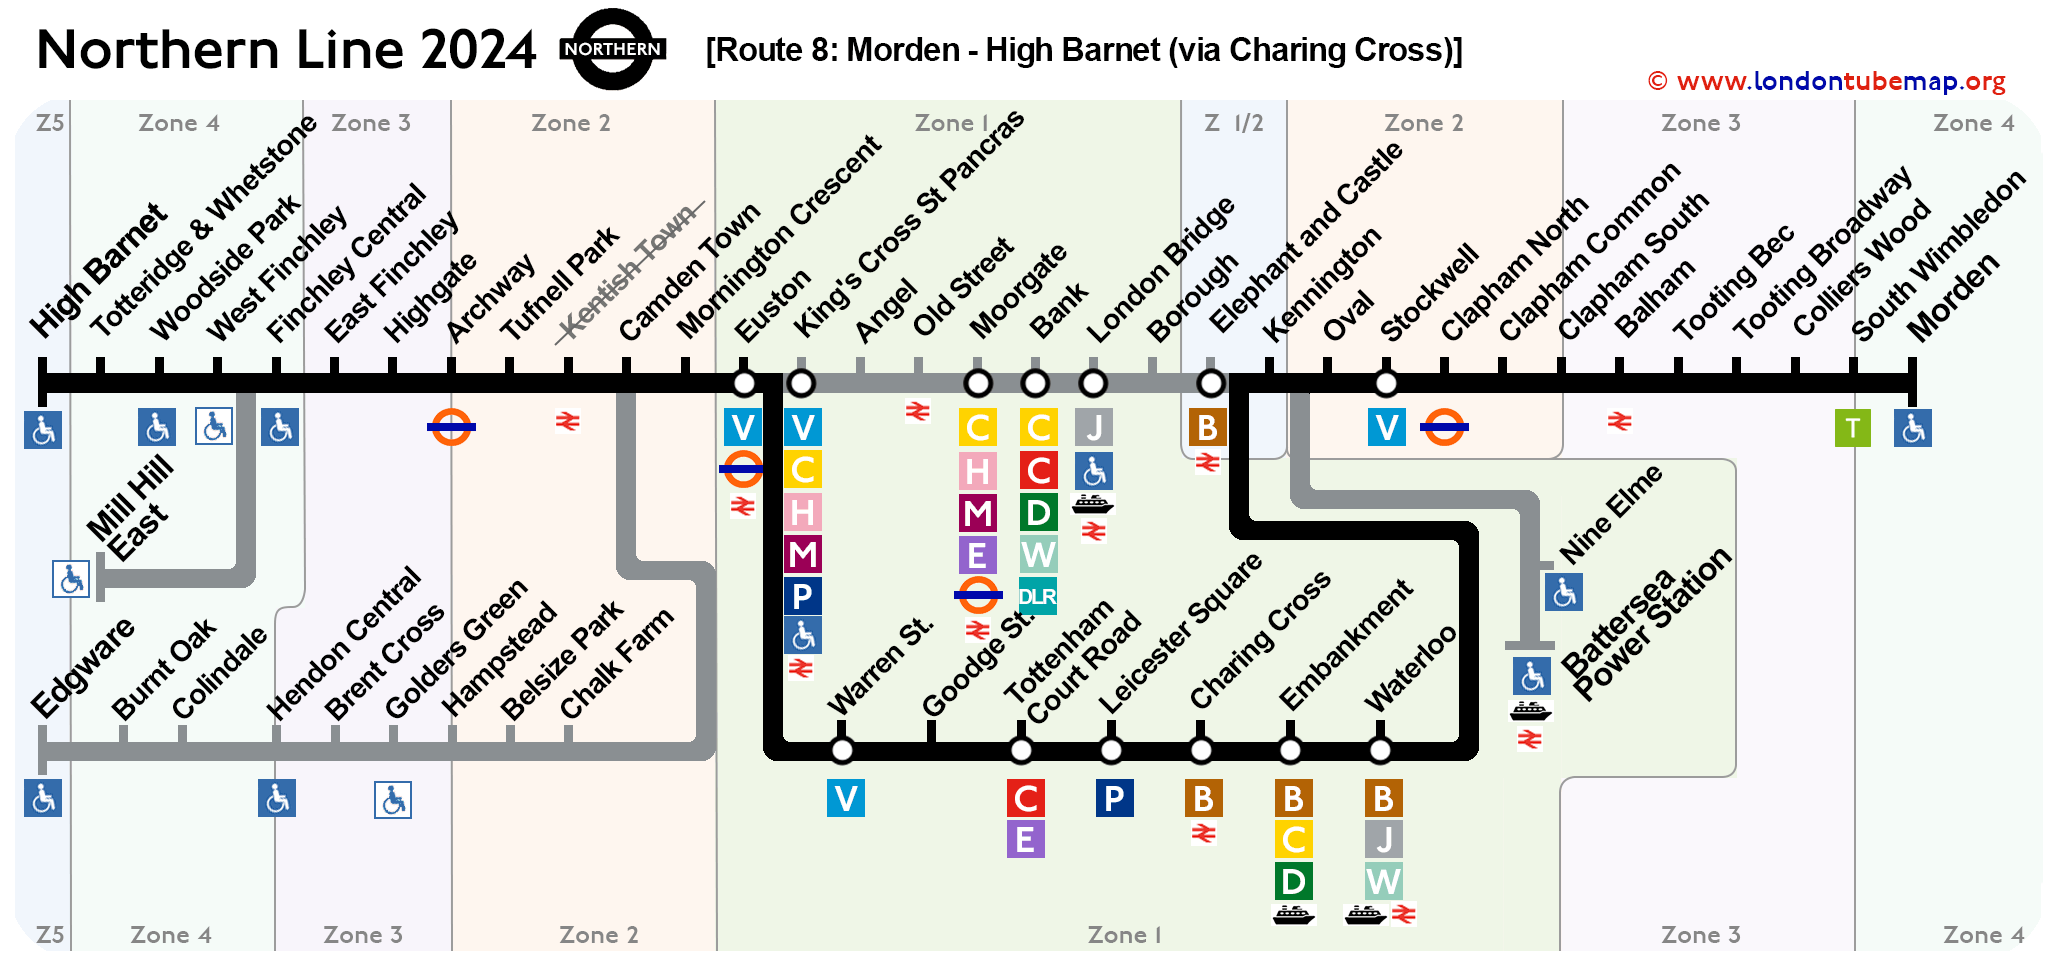 Northern line map 2024 Route-8 Morden High Barnet via Charing Cross